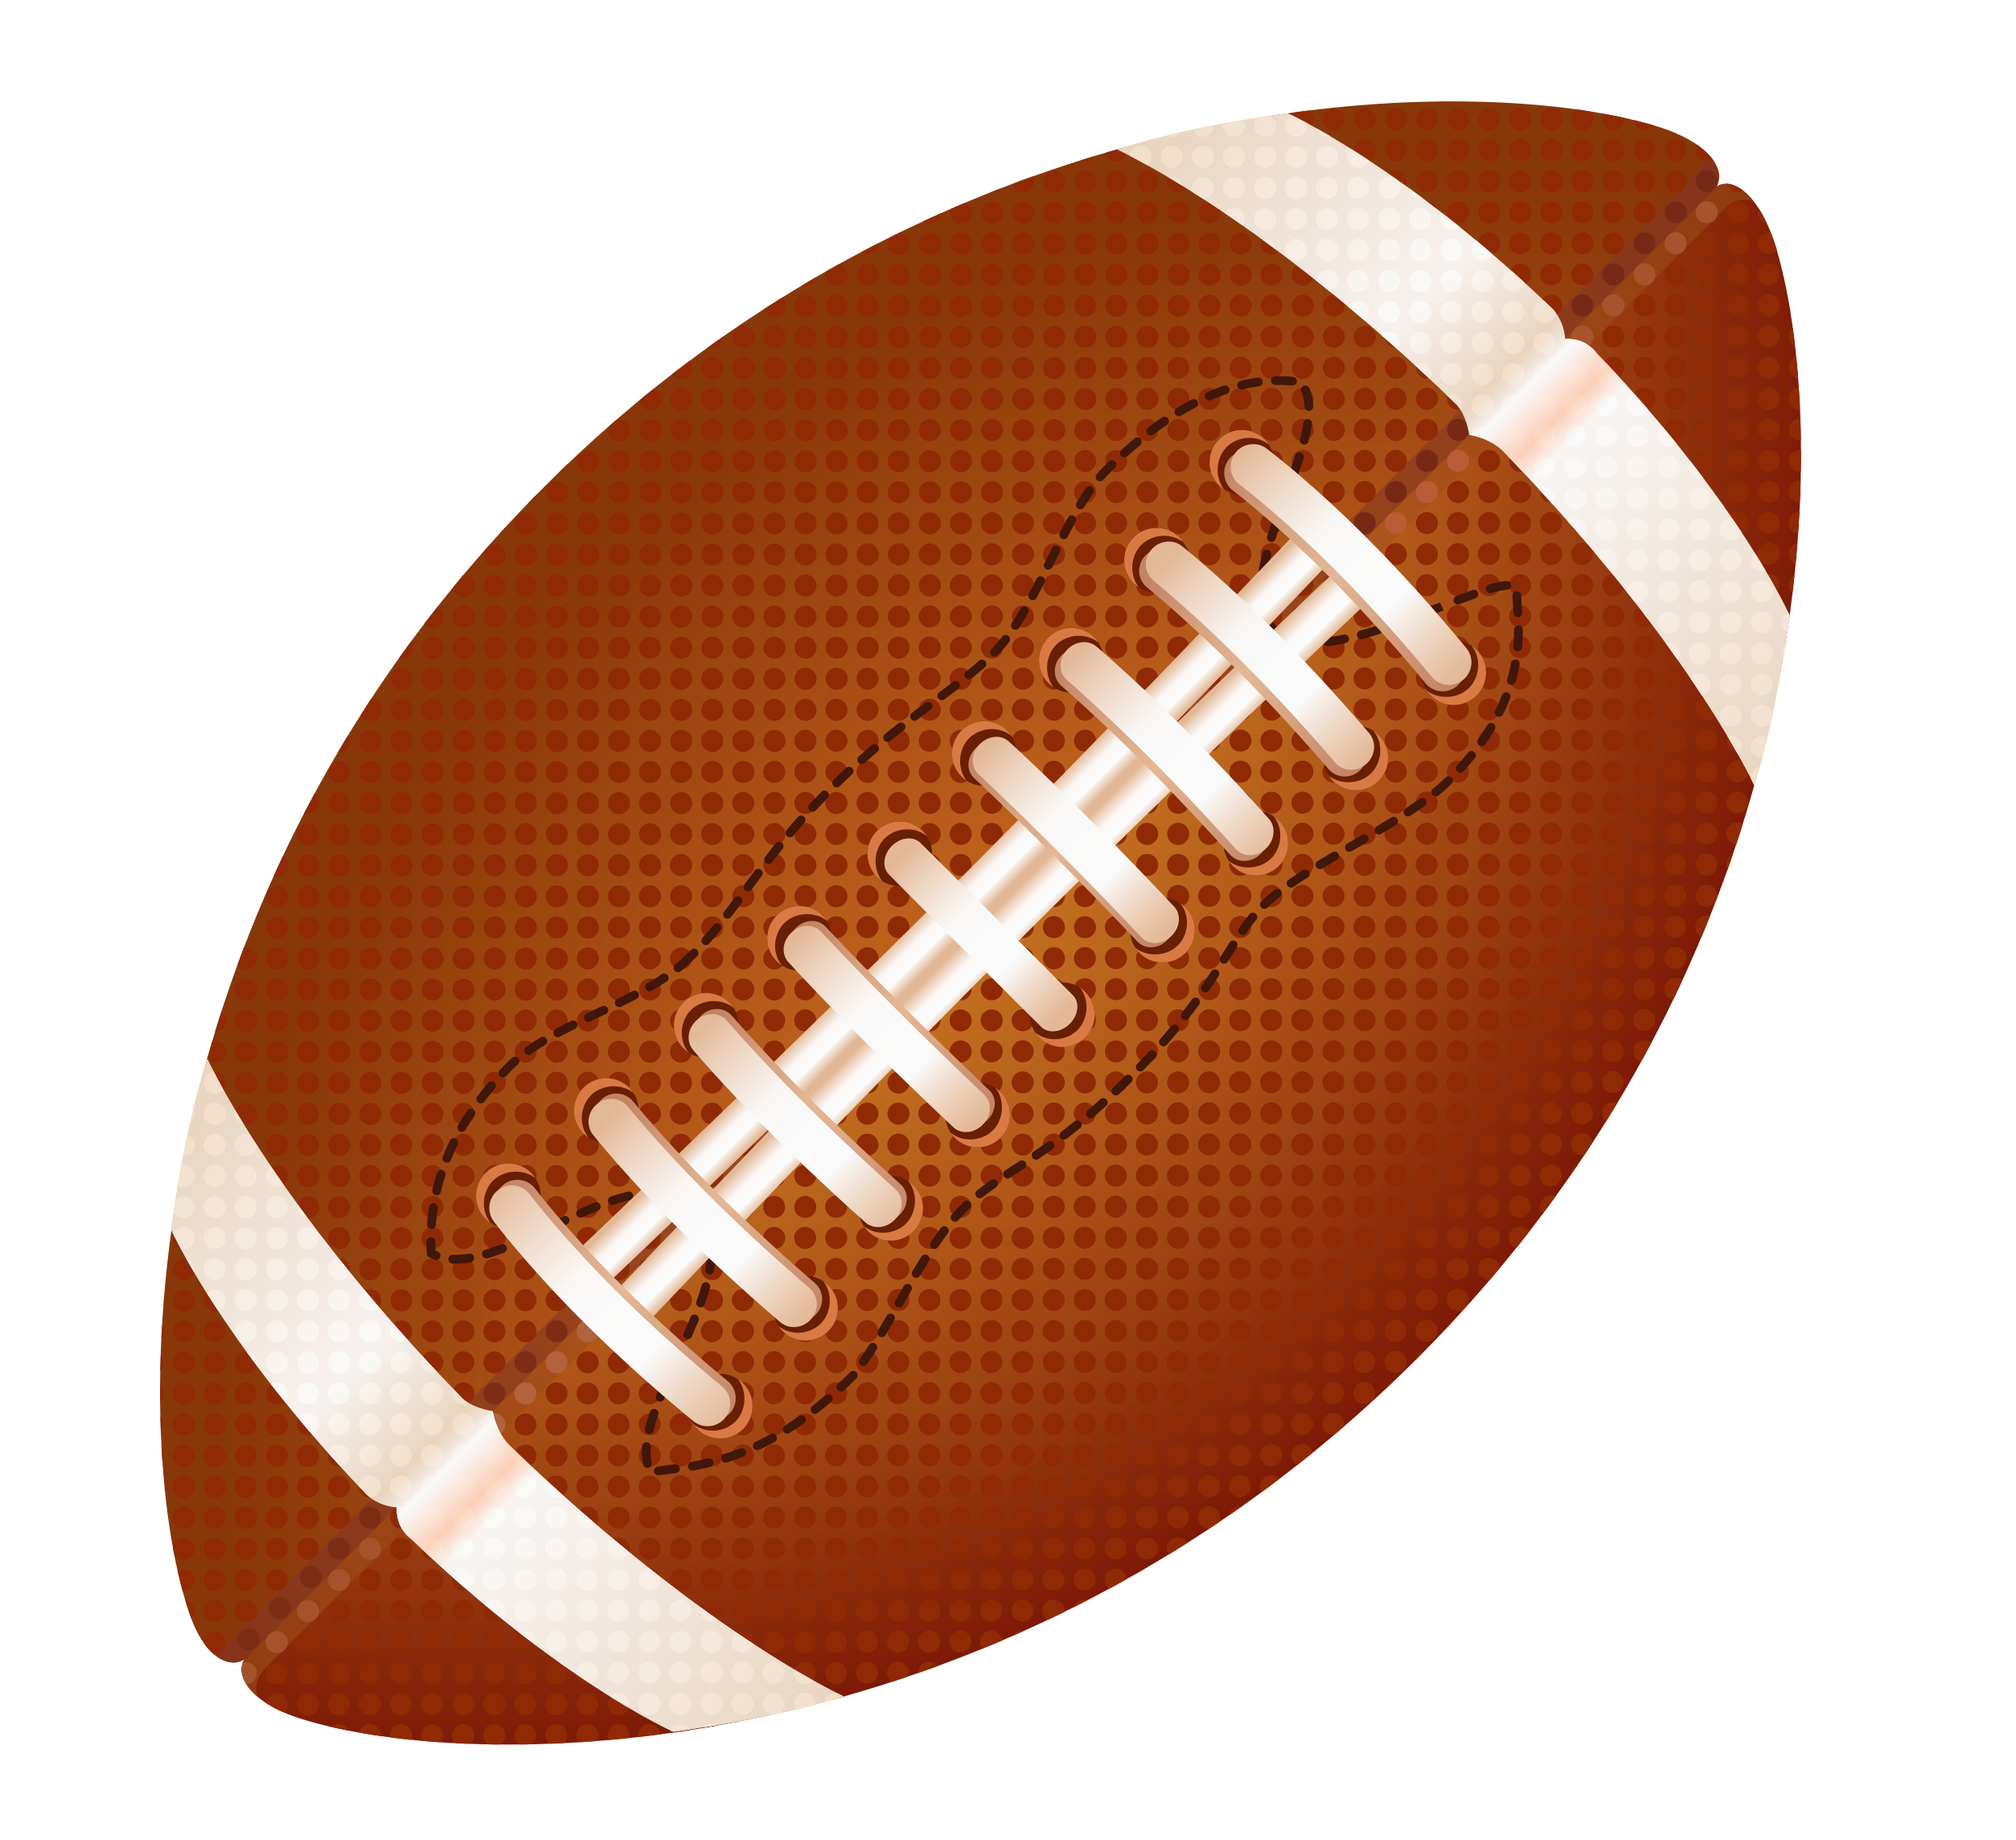 American Football Ball PNG Clipart Picture ?m=1435373701